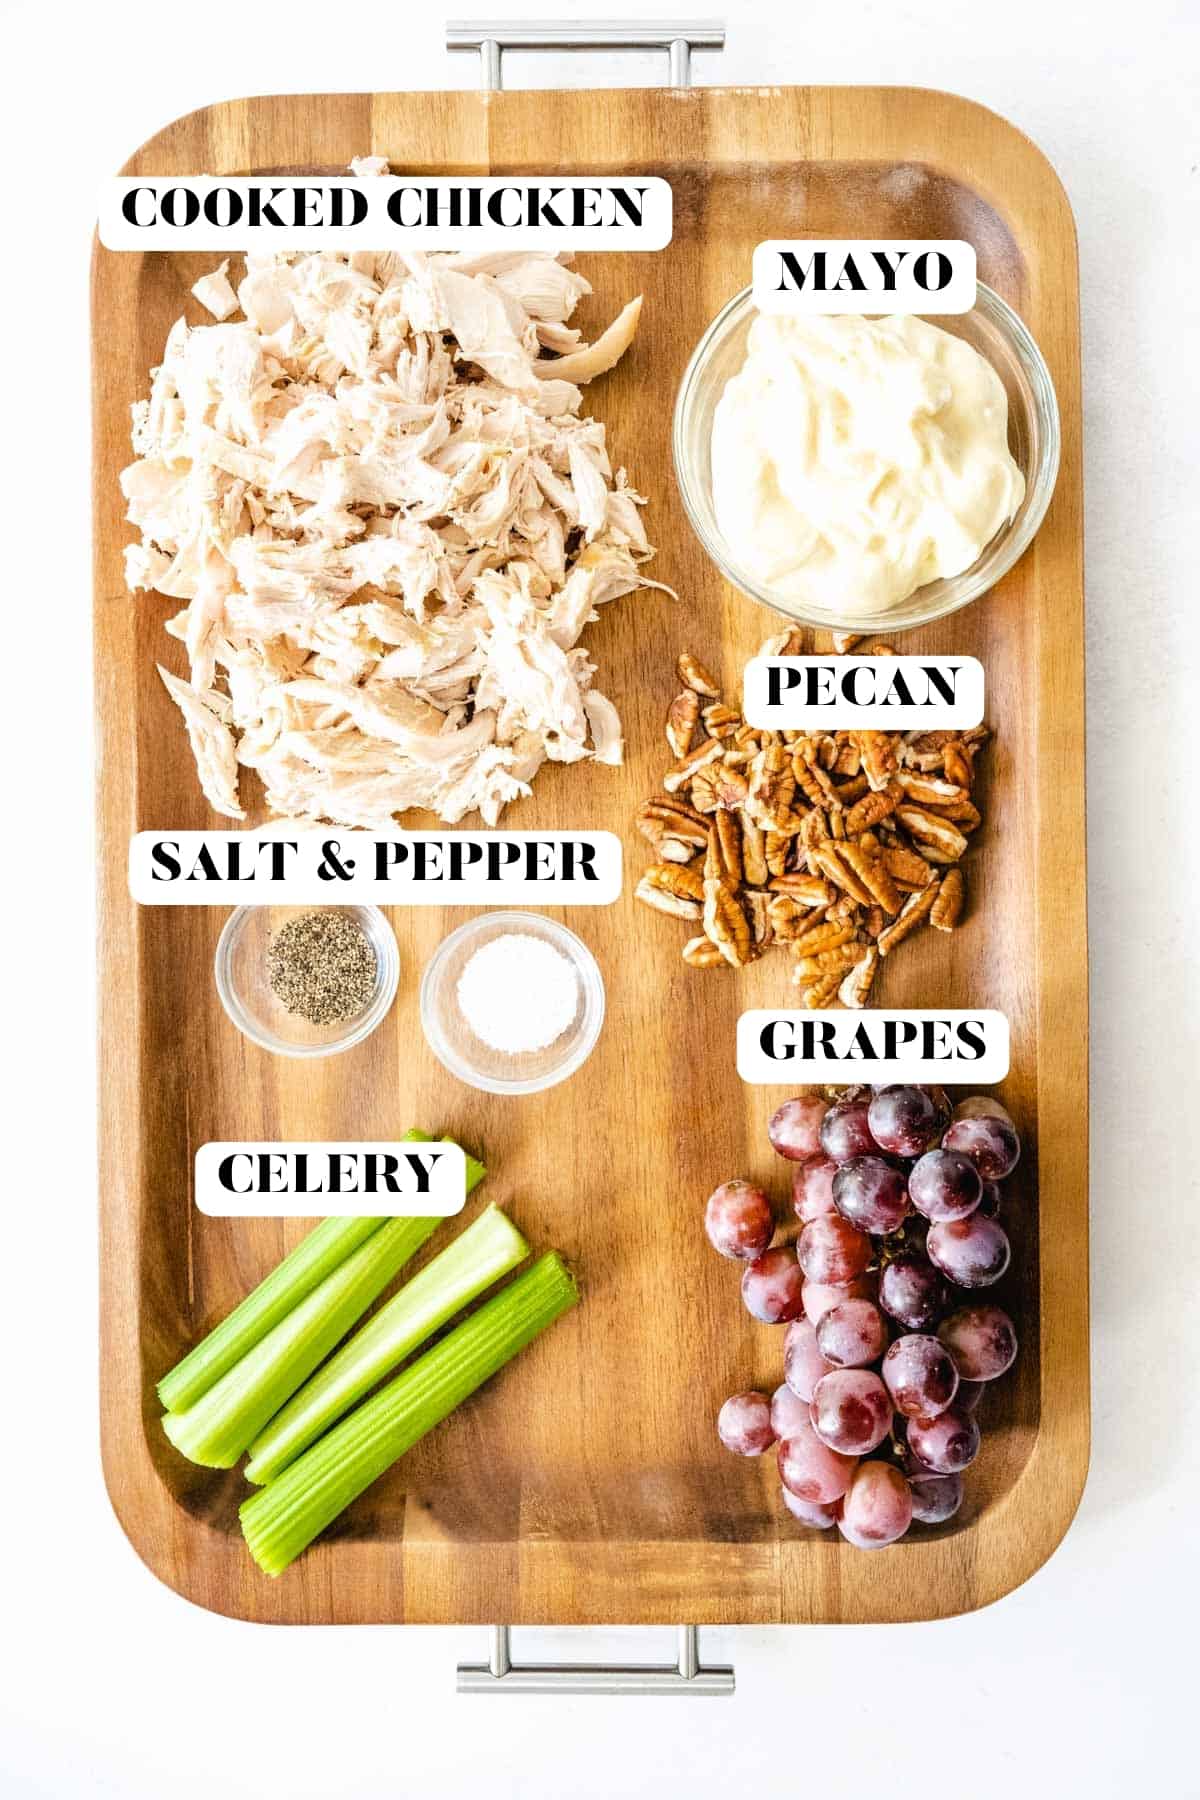 Chicken salad ingredients on a wooden tray labeled with text.